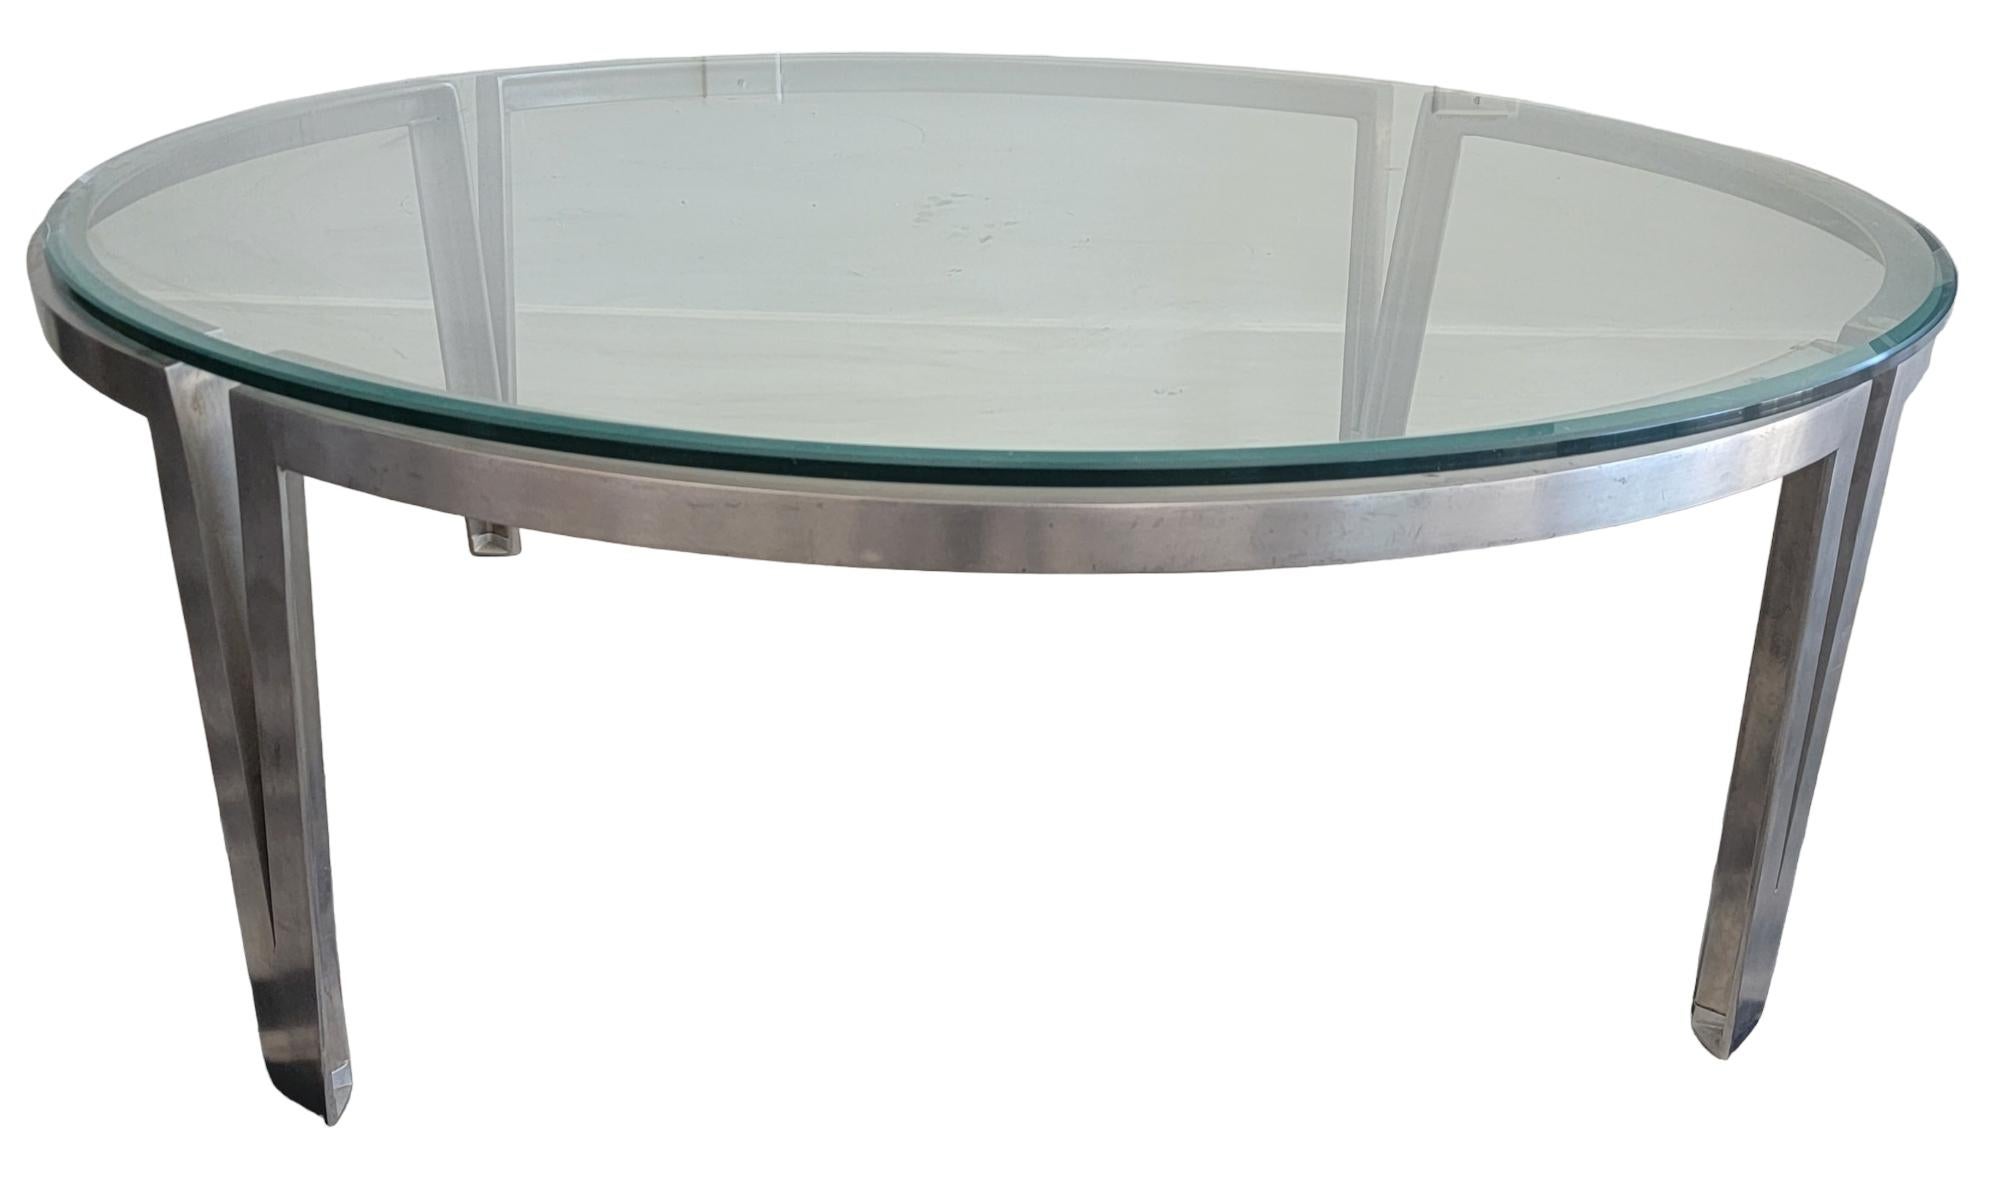 Italian Metal and glass contemporary coffee table. Very strong and sturdy base with a thick glass top. the glass top is a beveled glass piece. Glass is removable.

Measures approx. 44 x16.